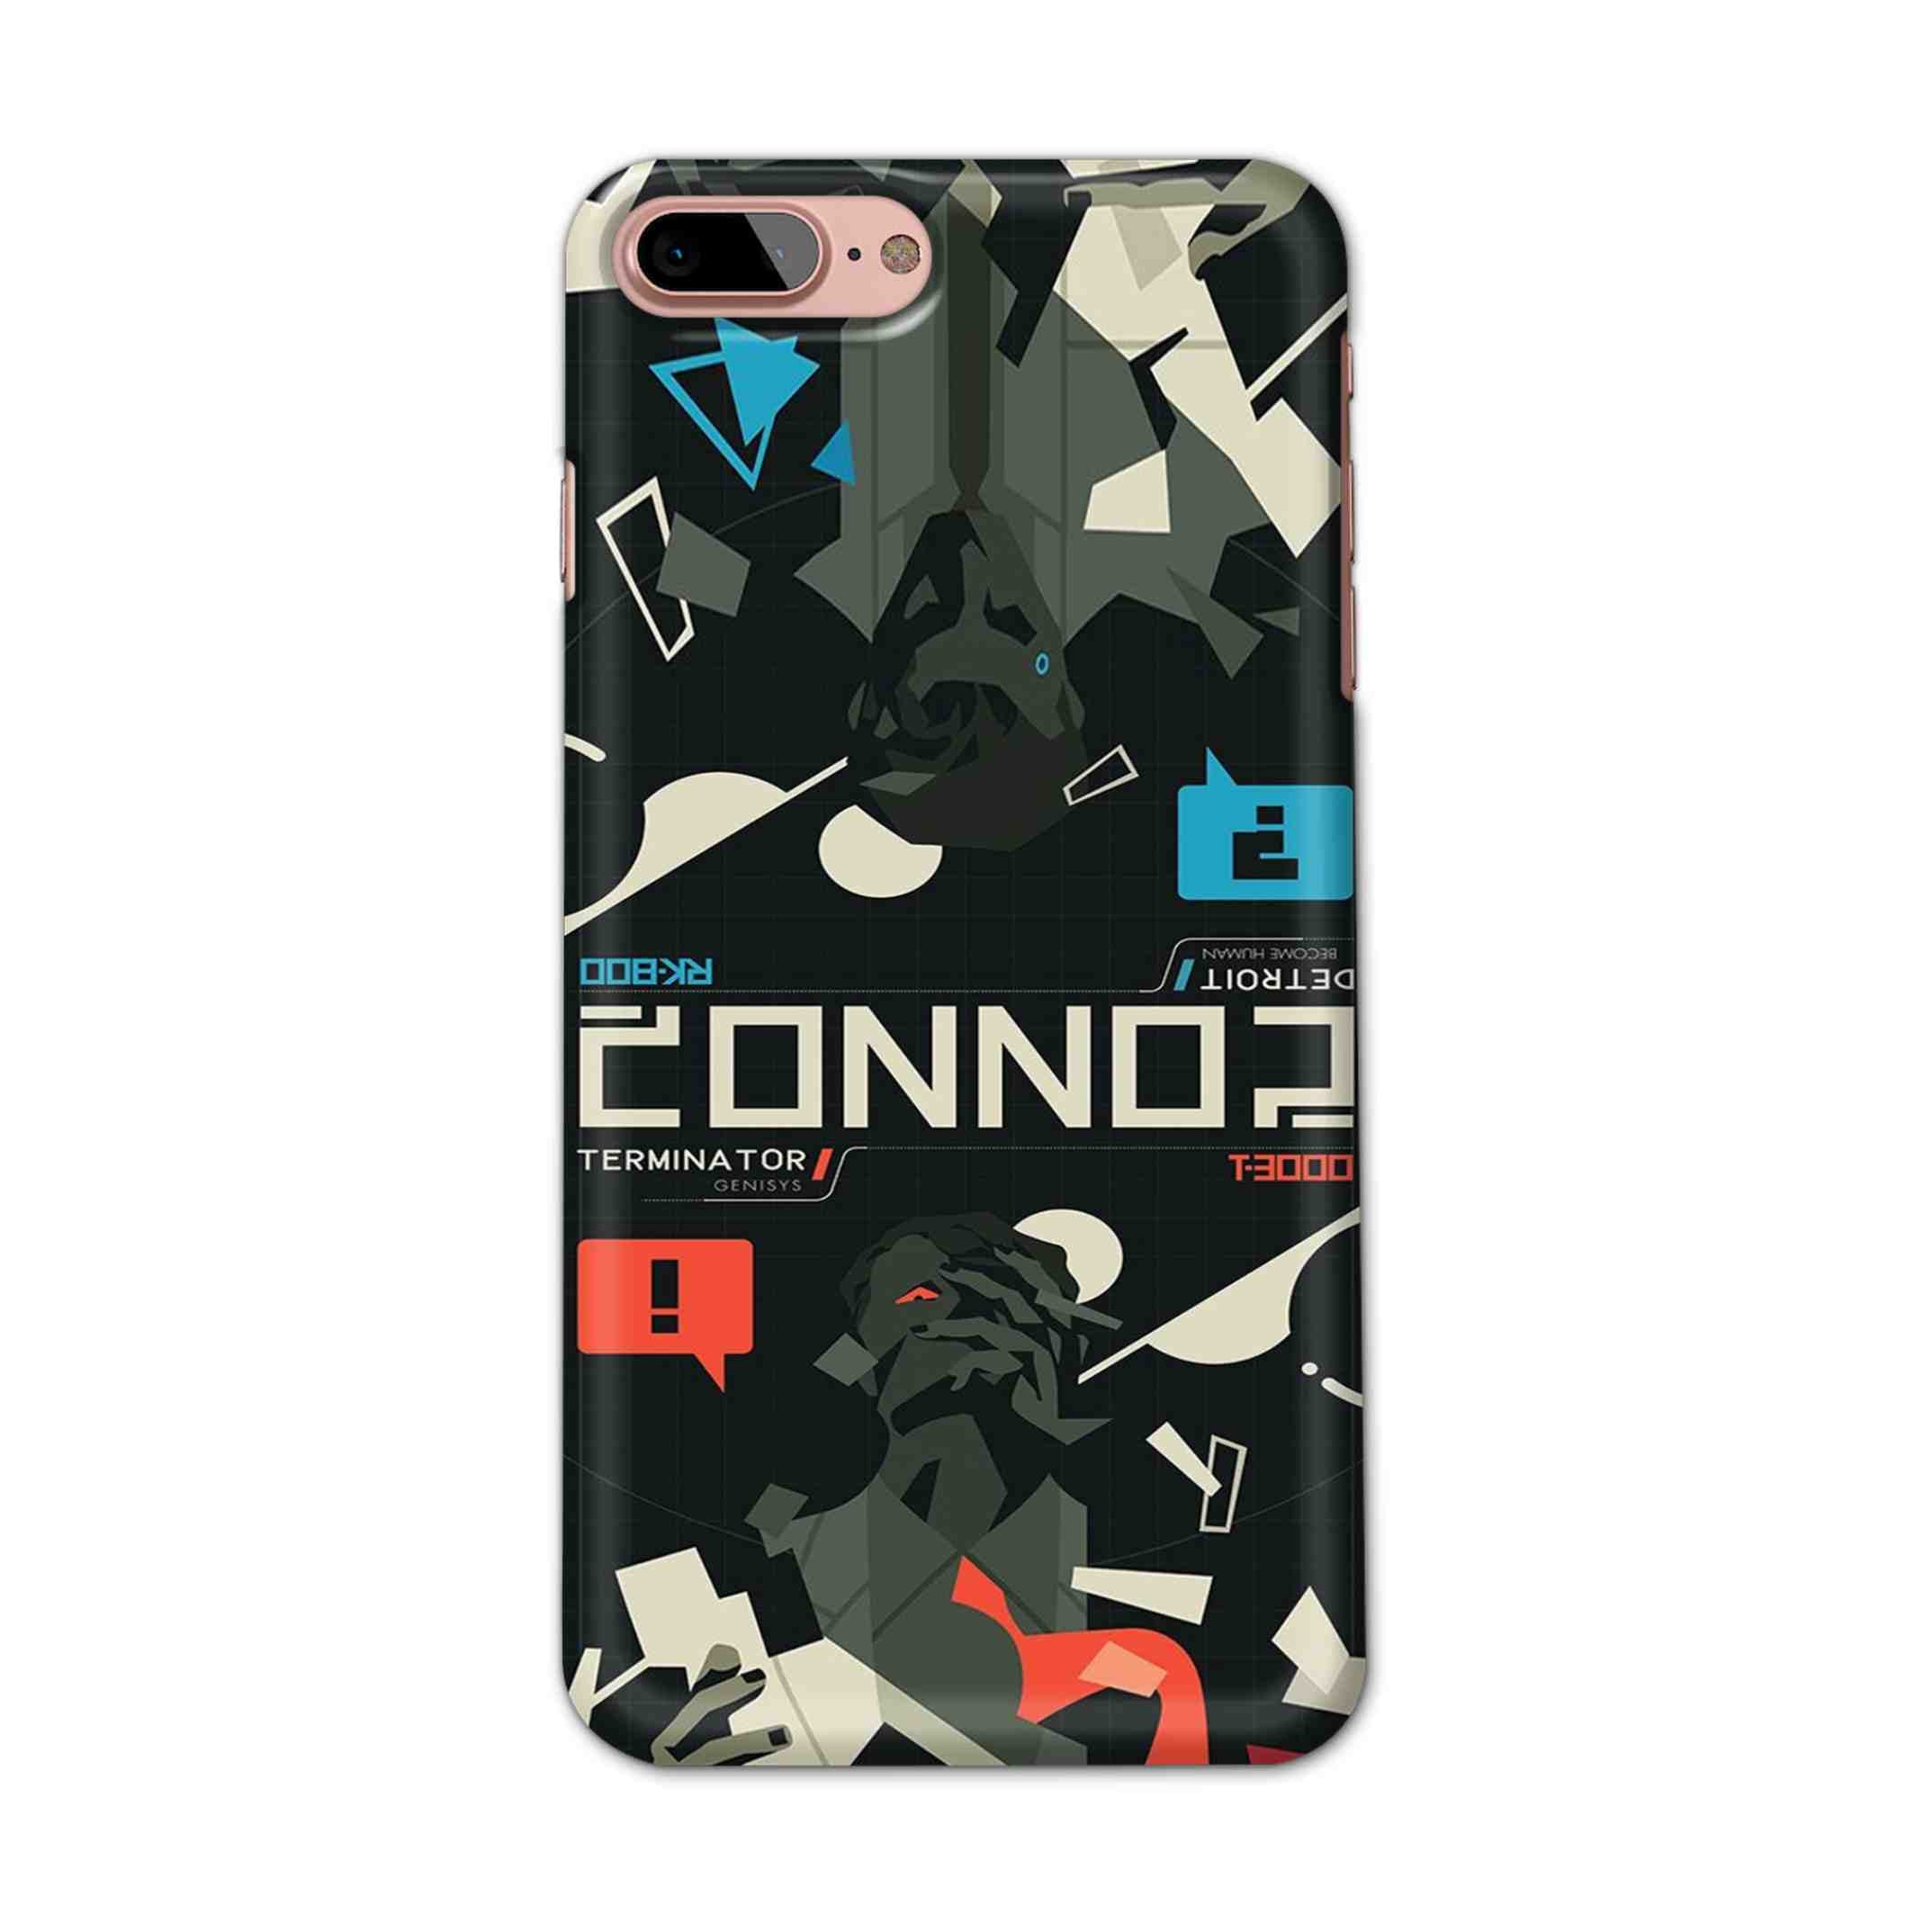 Buy Terminator Hard Back Mobile Phone Case/Cover For iPhone 7 Plus / 8 Plus Online